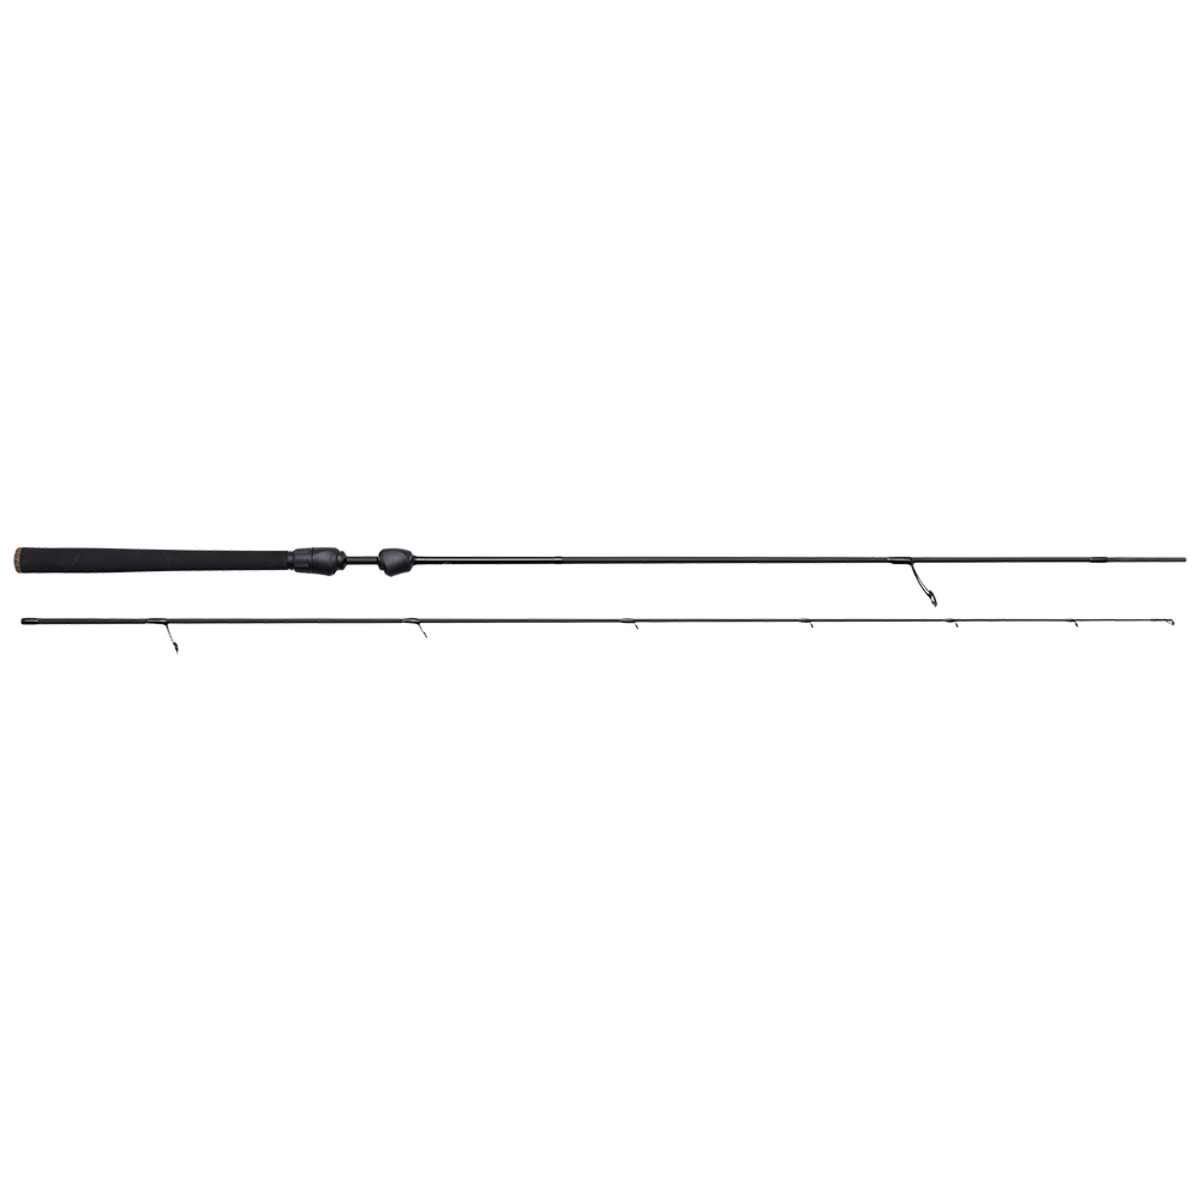 Ron Thompson Trout And Perch Stick - 8 ft 5in/259CM 5-22G 2SEC